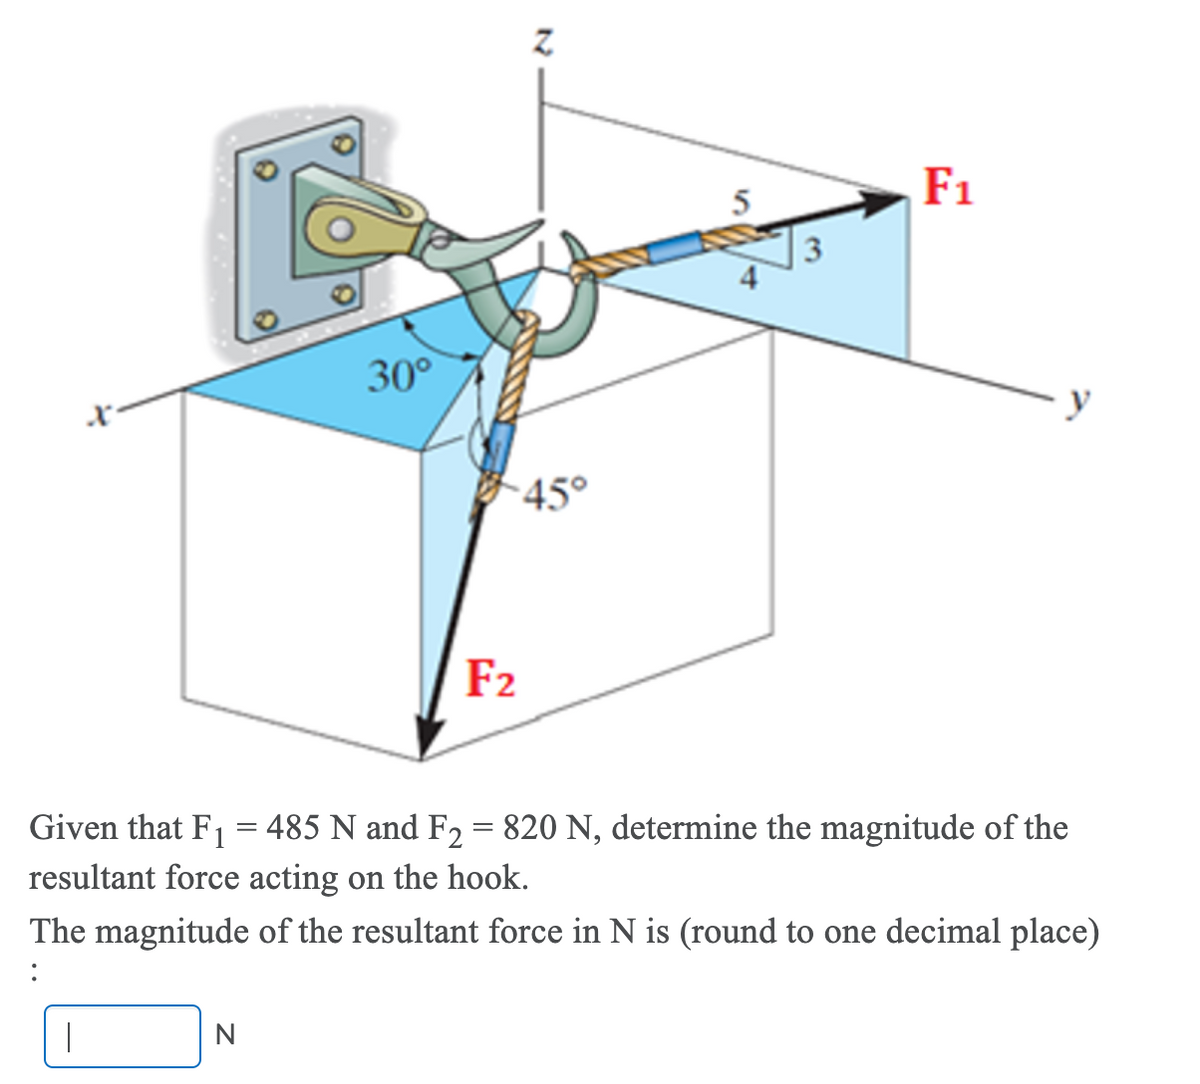 F1
3
30°
45°
F2
Given that F1 = 485 N and F2 = 820 N, determine the magnitude of the
resultant force acting on the hook.
The magnitude of the resultant force in N is (round to one decimal place)
N
